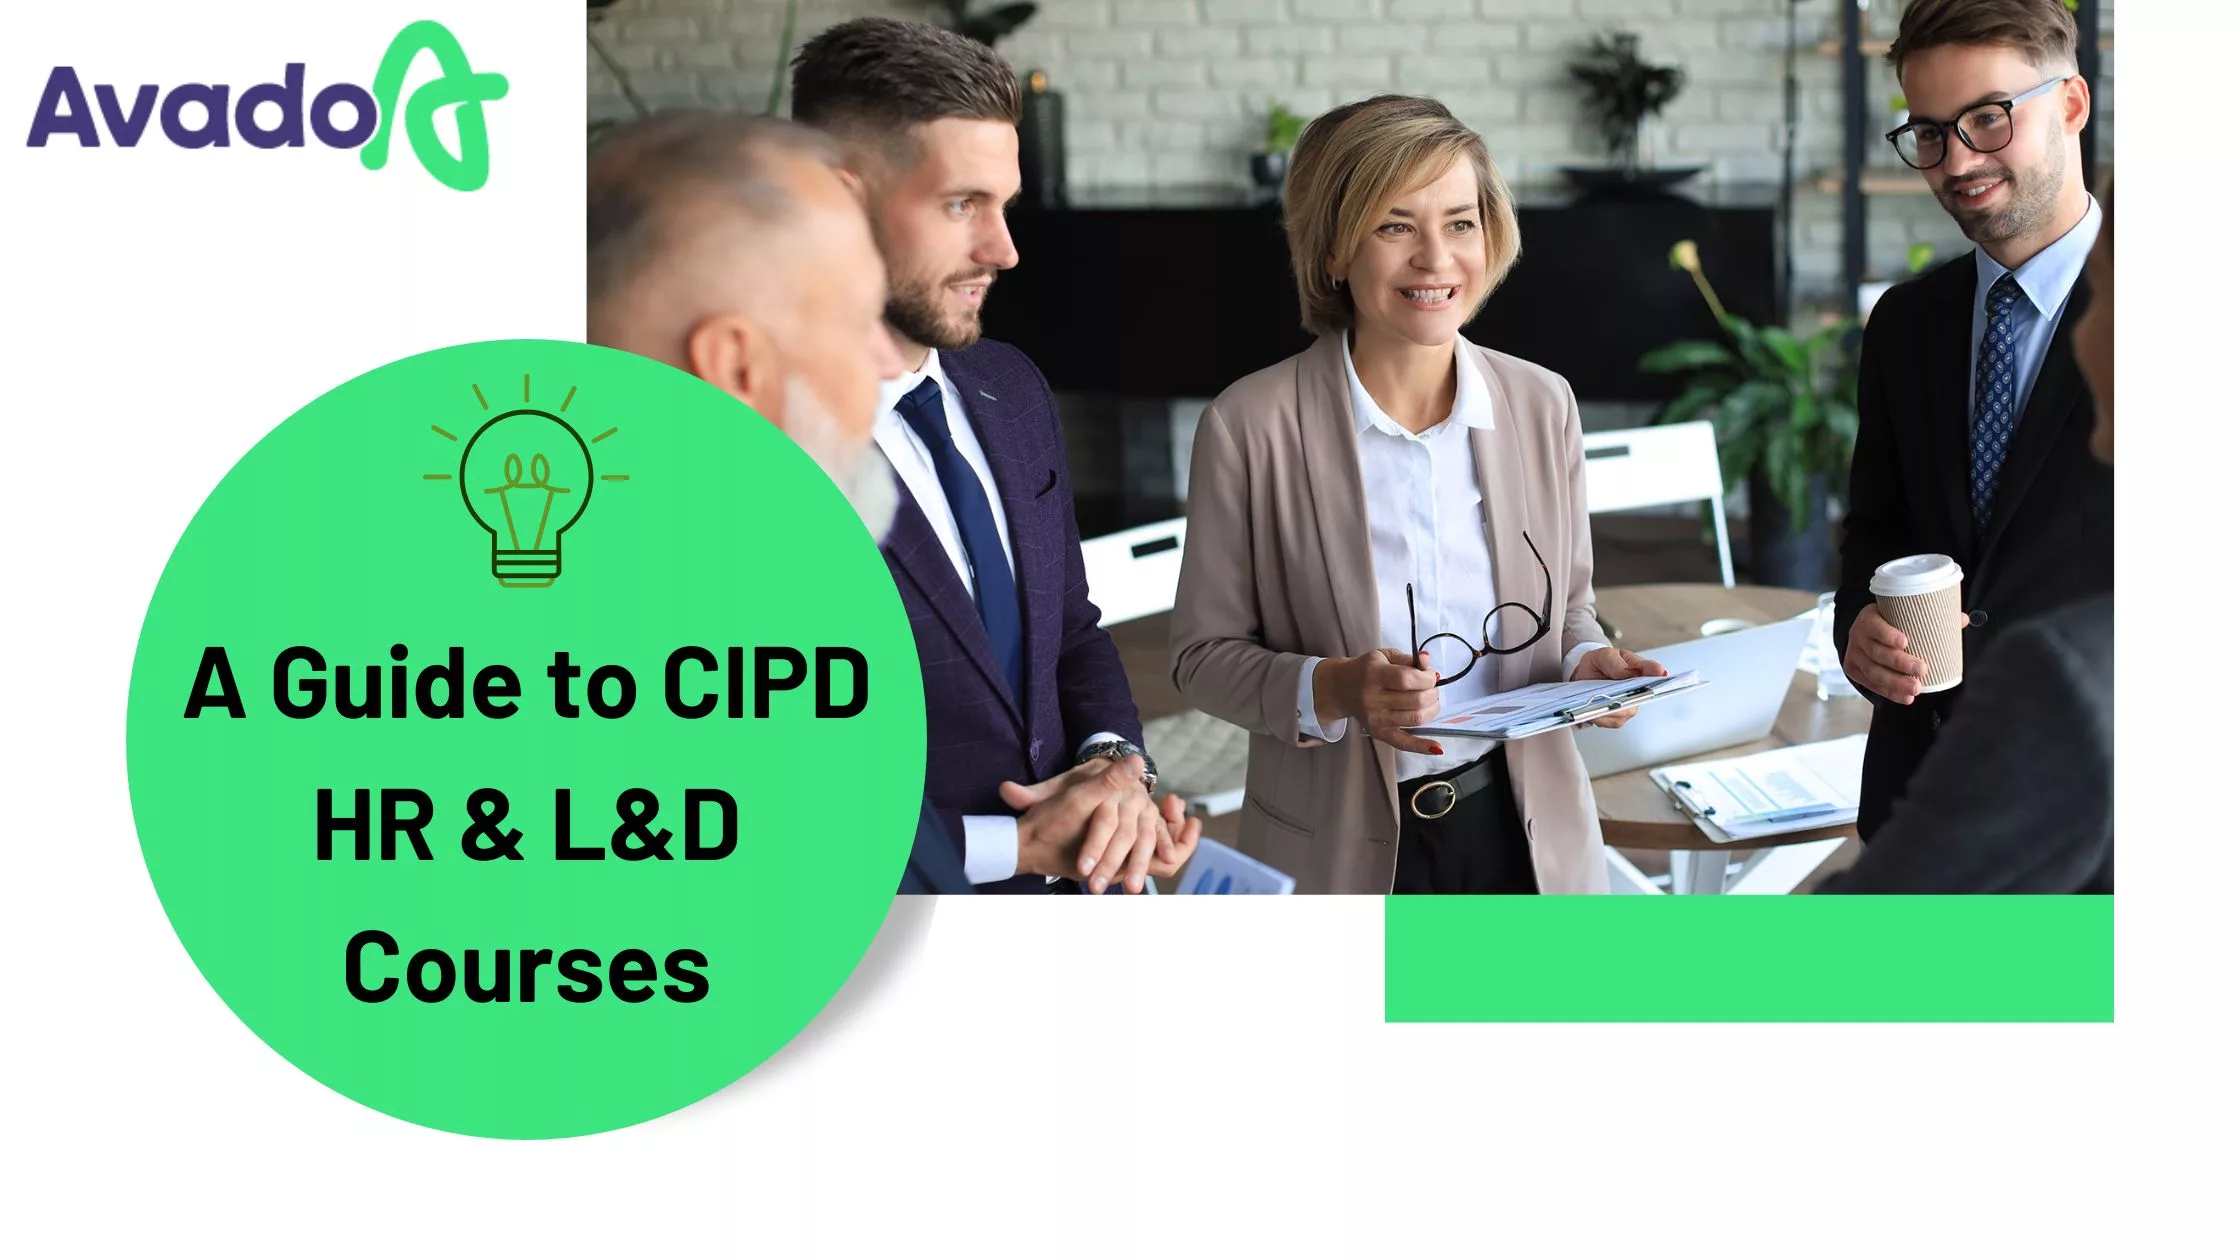 A Guide To CIPD HR & L&D Courses